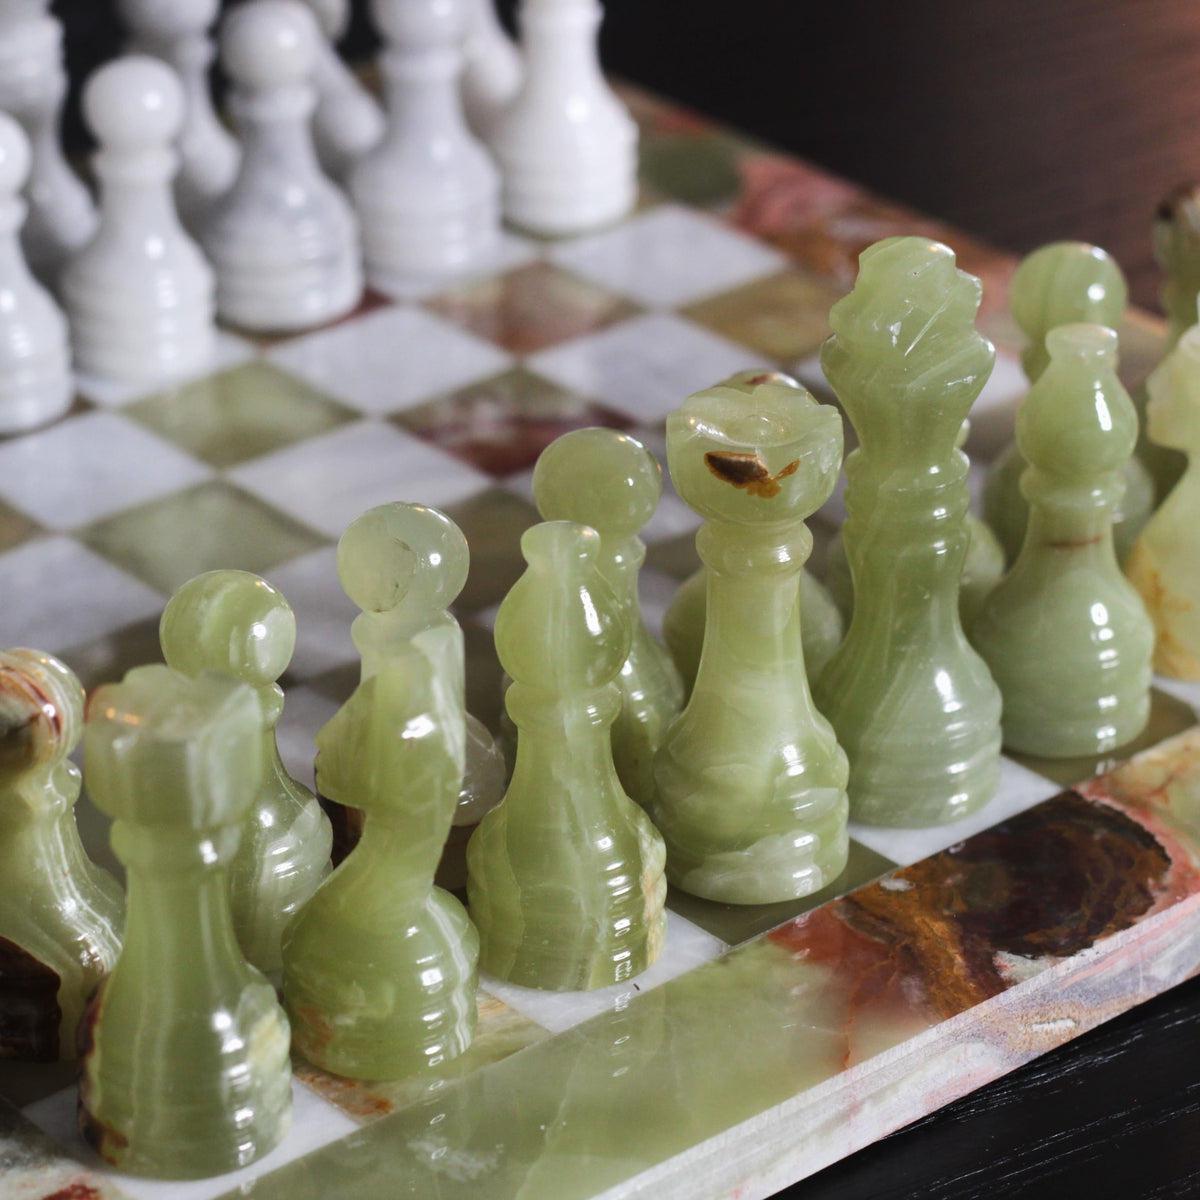 Marble Cultures Premium Marble Chess Set by Marble Cultures